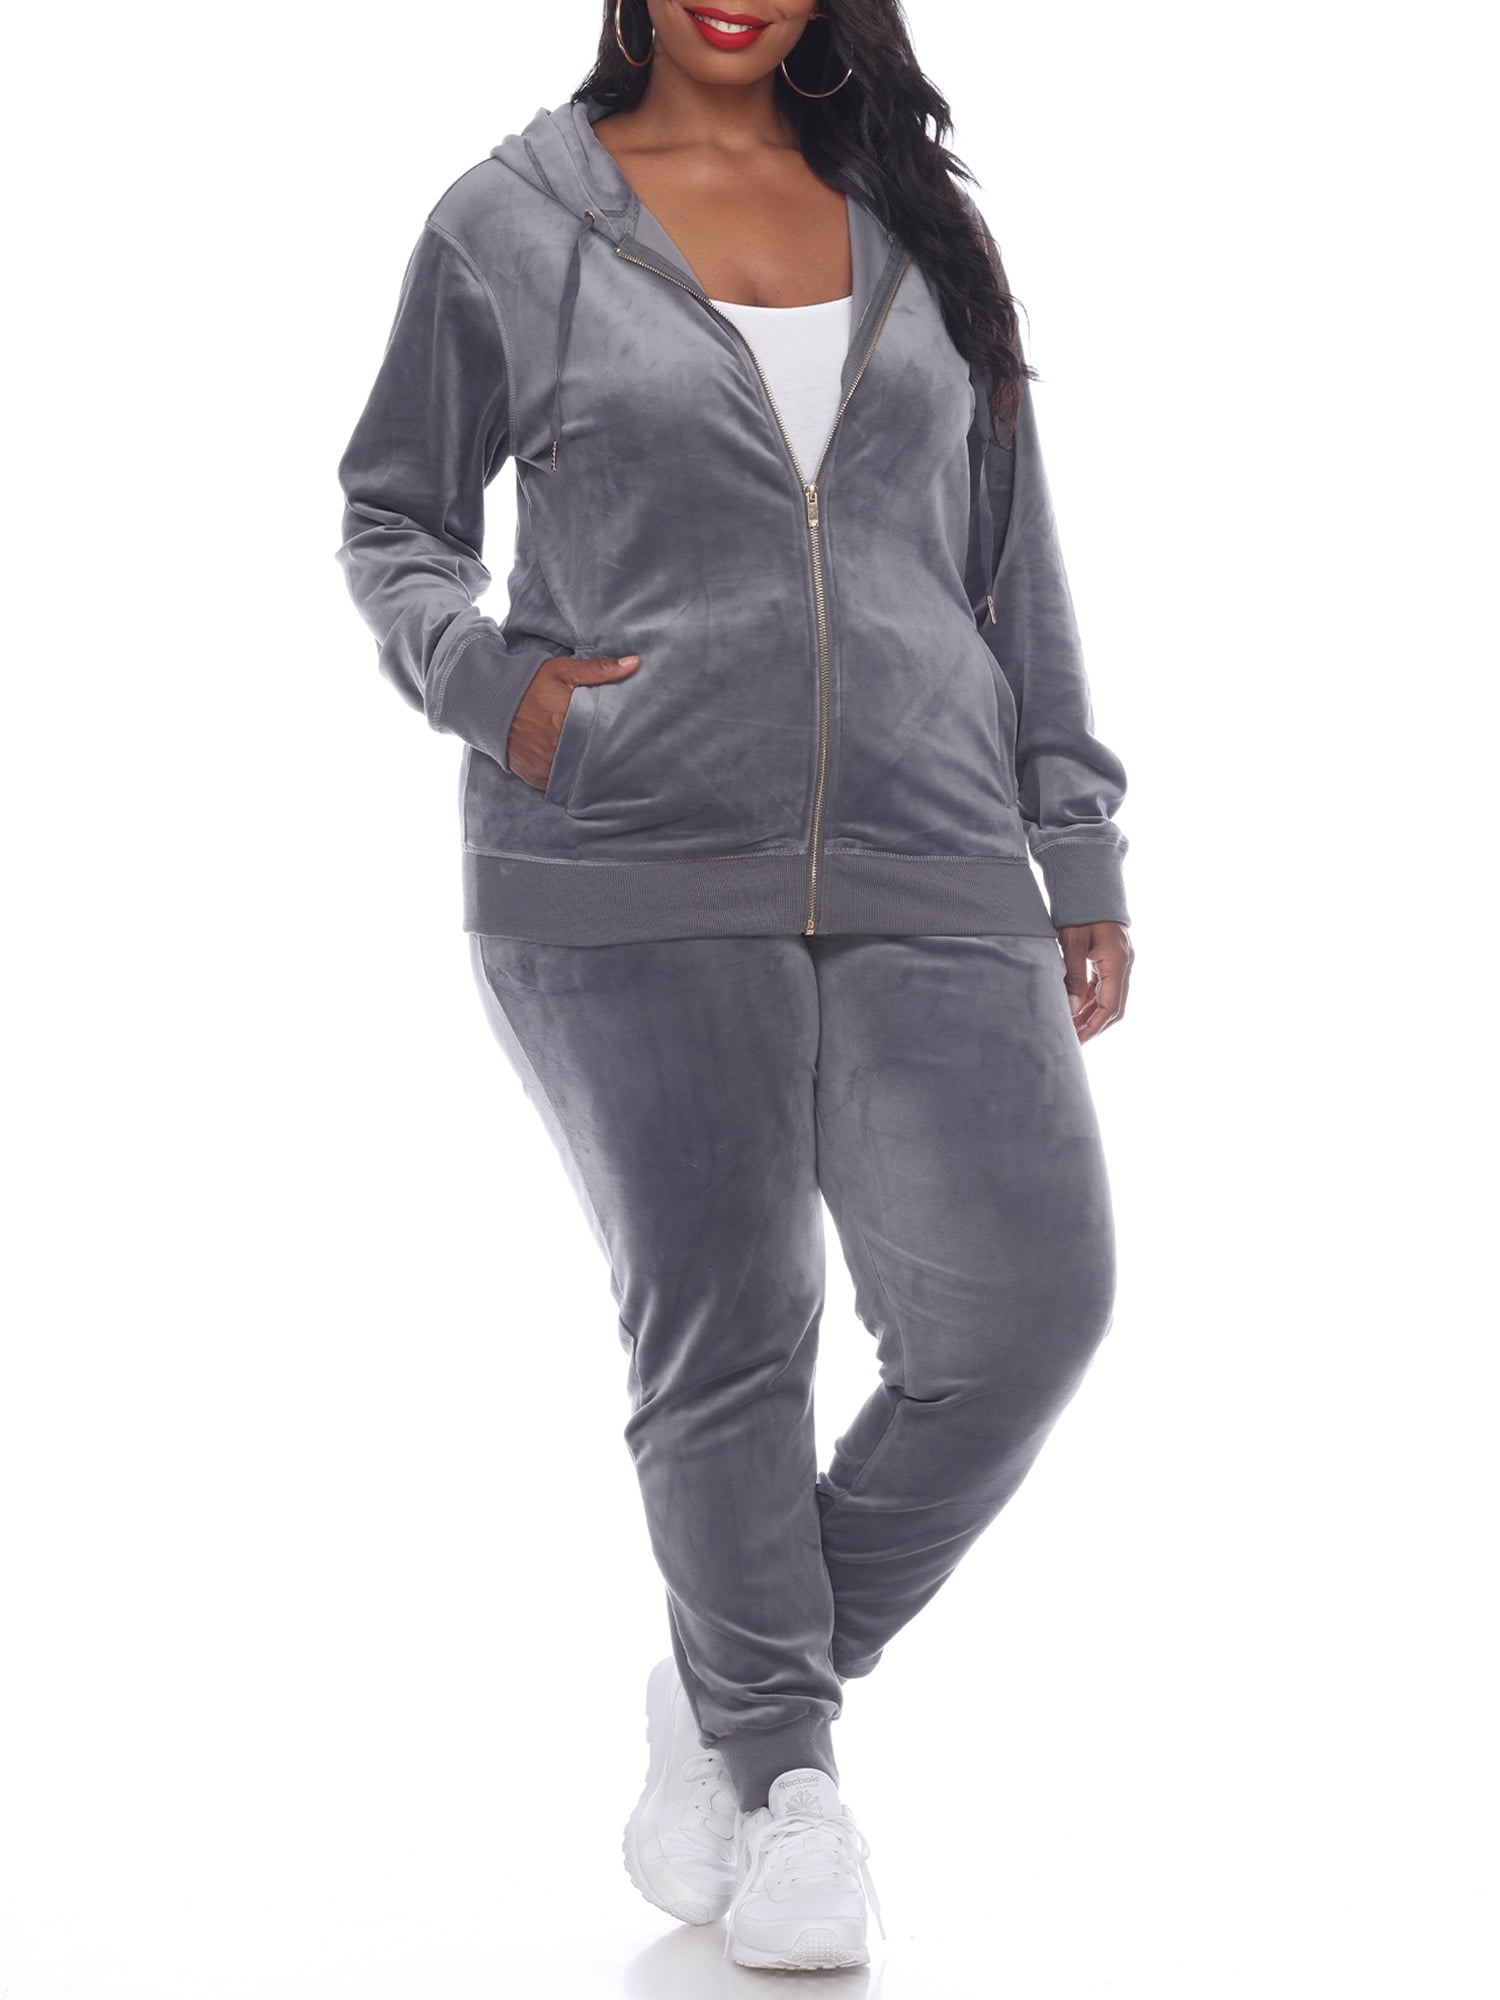 LADIES VELOUR TRACKSUITS SHORT SLEEVES VELOUR HOODIE AND JOGGING PANTS SHORTS 